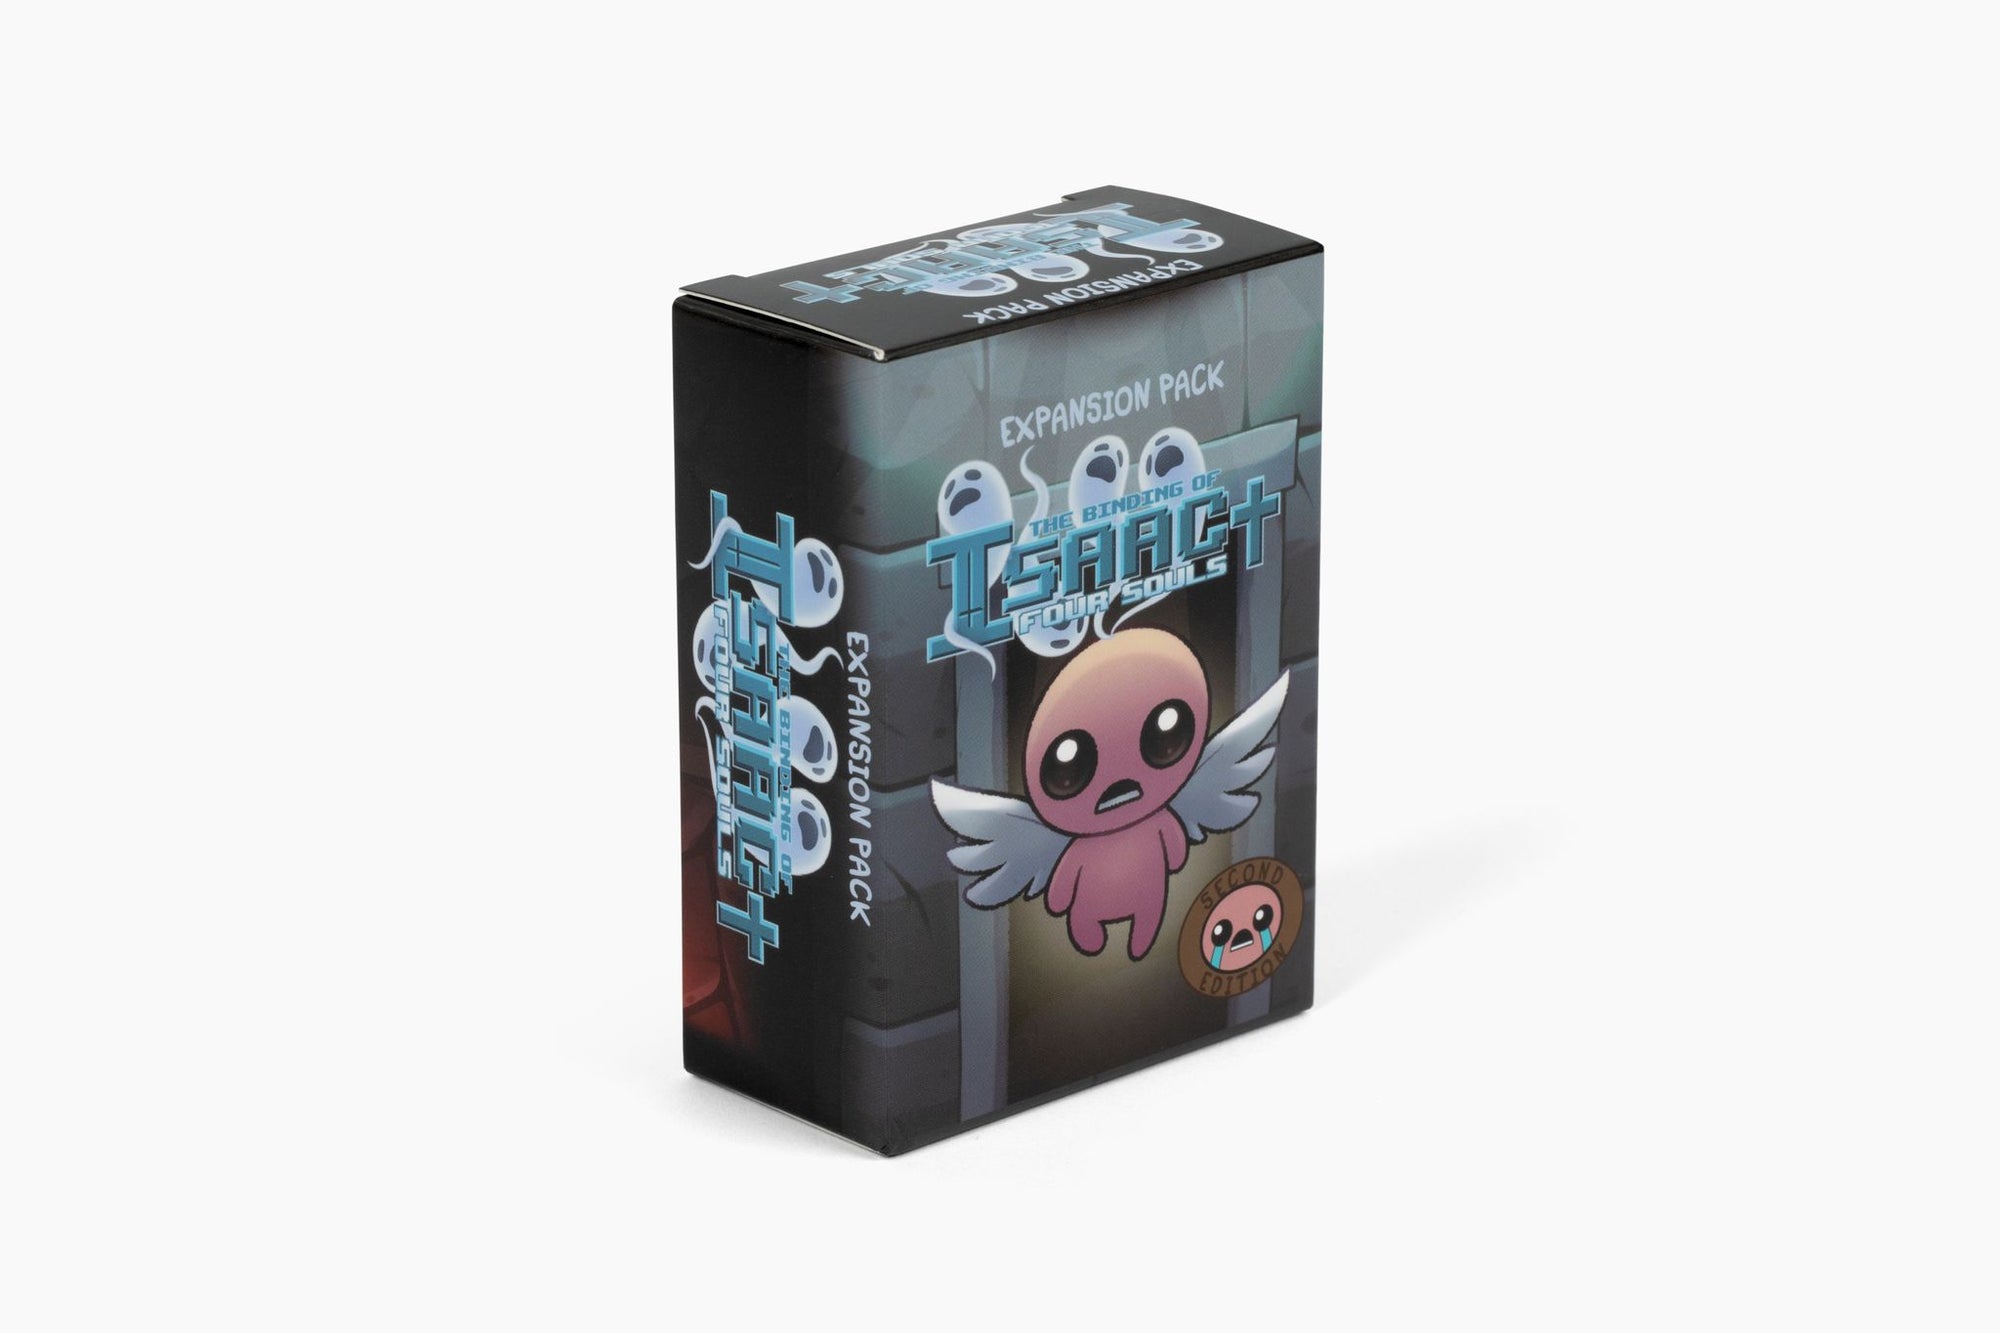 The Binding of Isaac: Four Souls Requiem - The Ultimate Collection